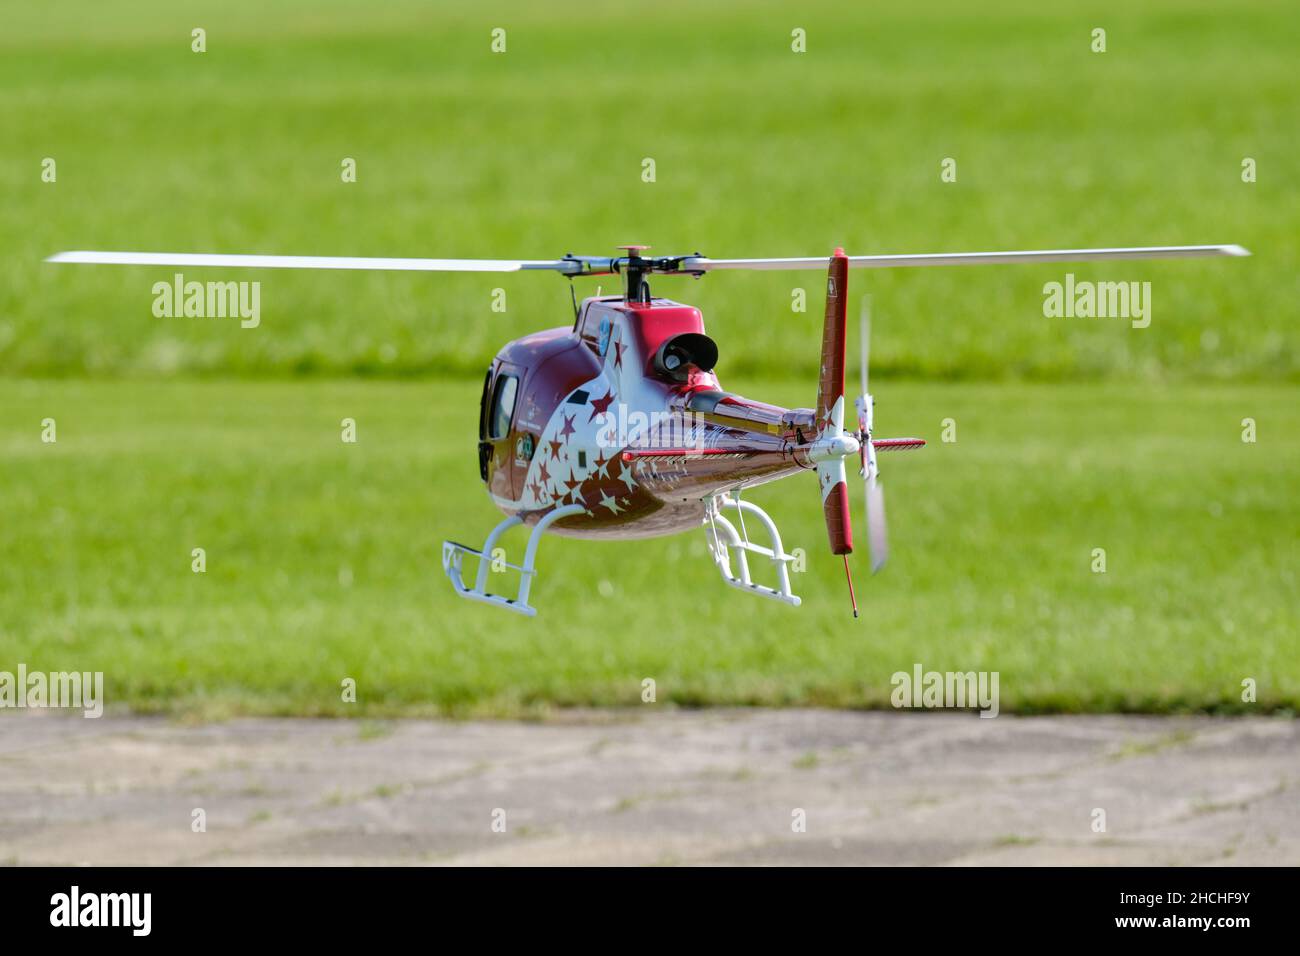 Neunhof, Germany - September 02, 2021: Rear view of a radio controlled scale model of a AS350 Ecureuil helicopter with Air Zermatt design is hovering Stock Photo